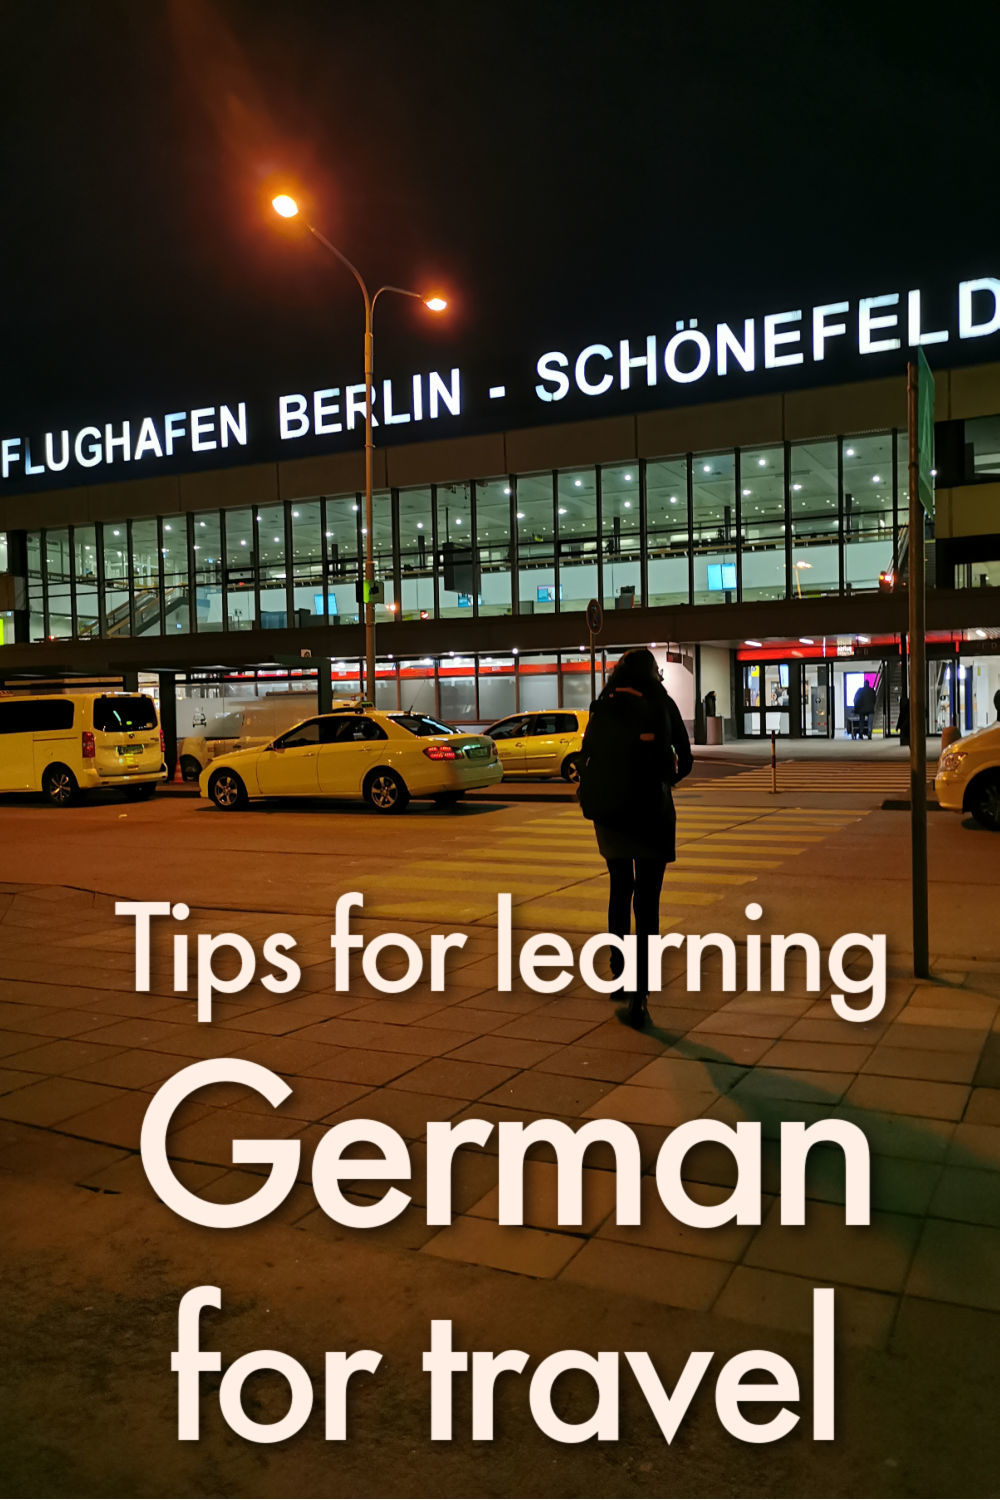 Learning German can be intimidating at the first moment. But if you can add to your routine activities where the German language is present, the learning process will be easier and quicker. So here are our 3 tips for learning German for travel. These German learning tips are perfect for those planning a holiday in a German-speaking country, so you can start studying German from the planning until the end of the trip. 